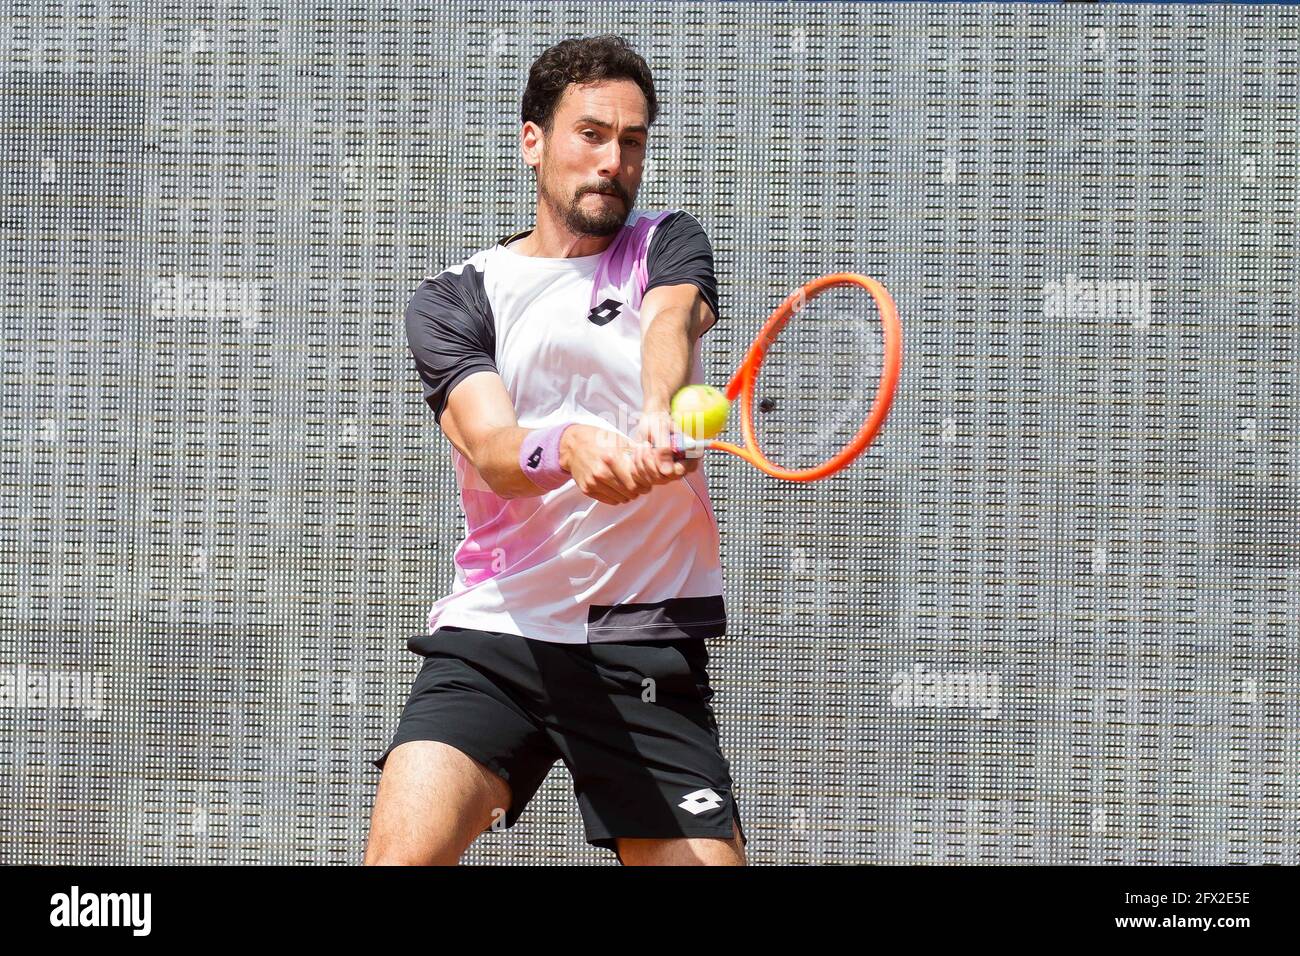 Parma, Italy. 25th May, 2021. Gianluca MAGER of the Italy during ATP 250  Emilia-Romagna Open 2021, Tennis Internationals in Parma, Italy, May 25  2021 Credit: Independent Photo Agency/Alamy Live News Stock Photo - Alamy